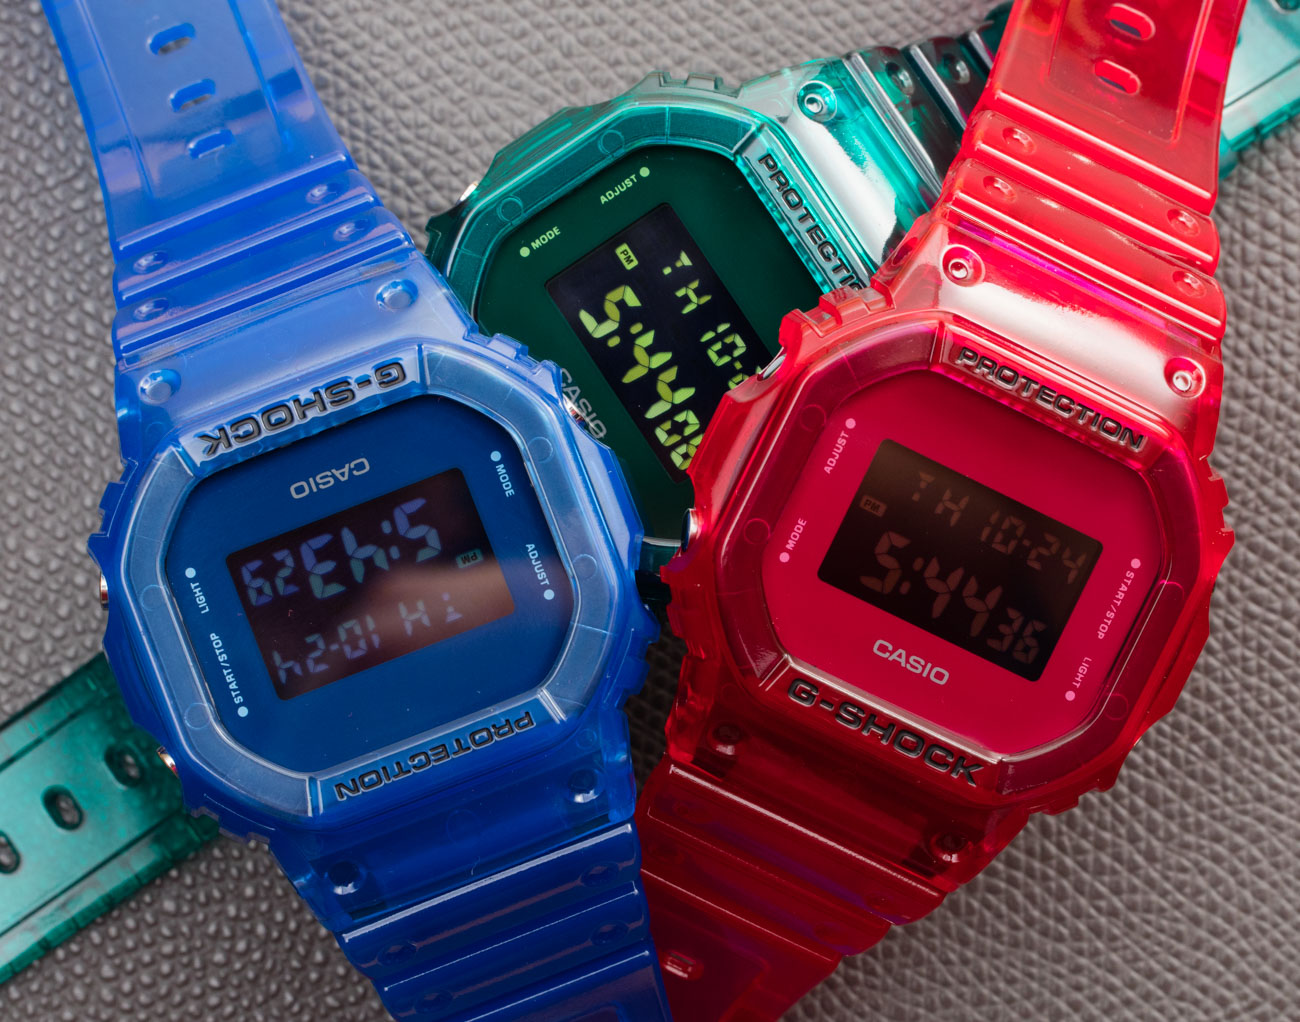 Casio G Shock Dw5600sb Jelly Watches Hands On Ablogtowatch